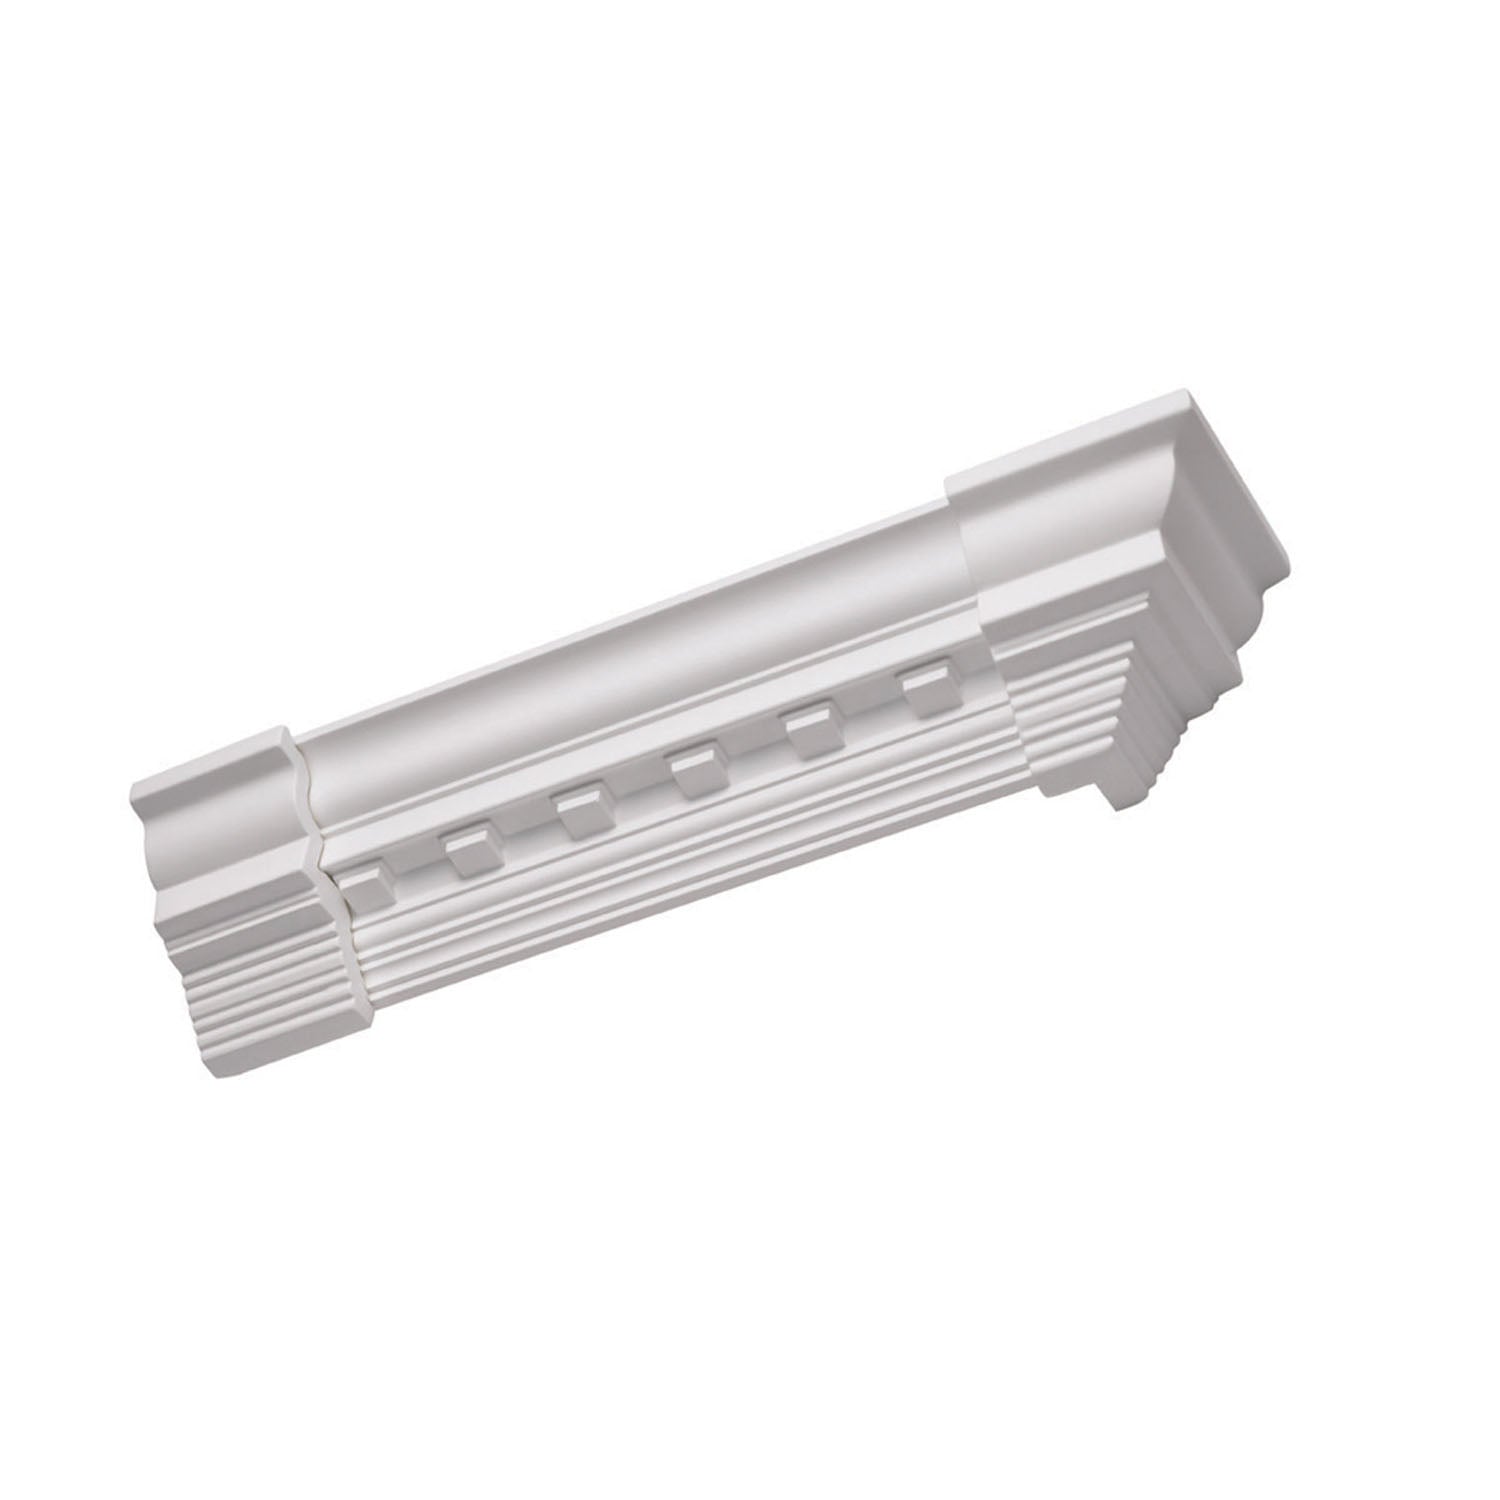 Focal Point Lighting 22302 Accessories Concord Dentil Outside- 4 1/8 Decor White